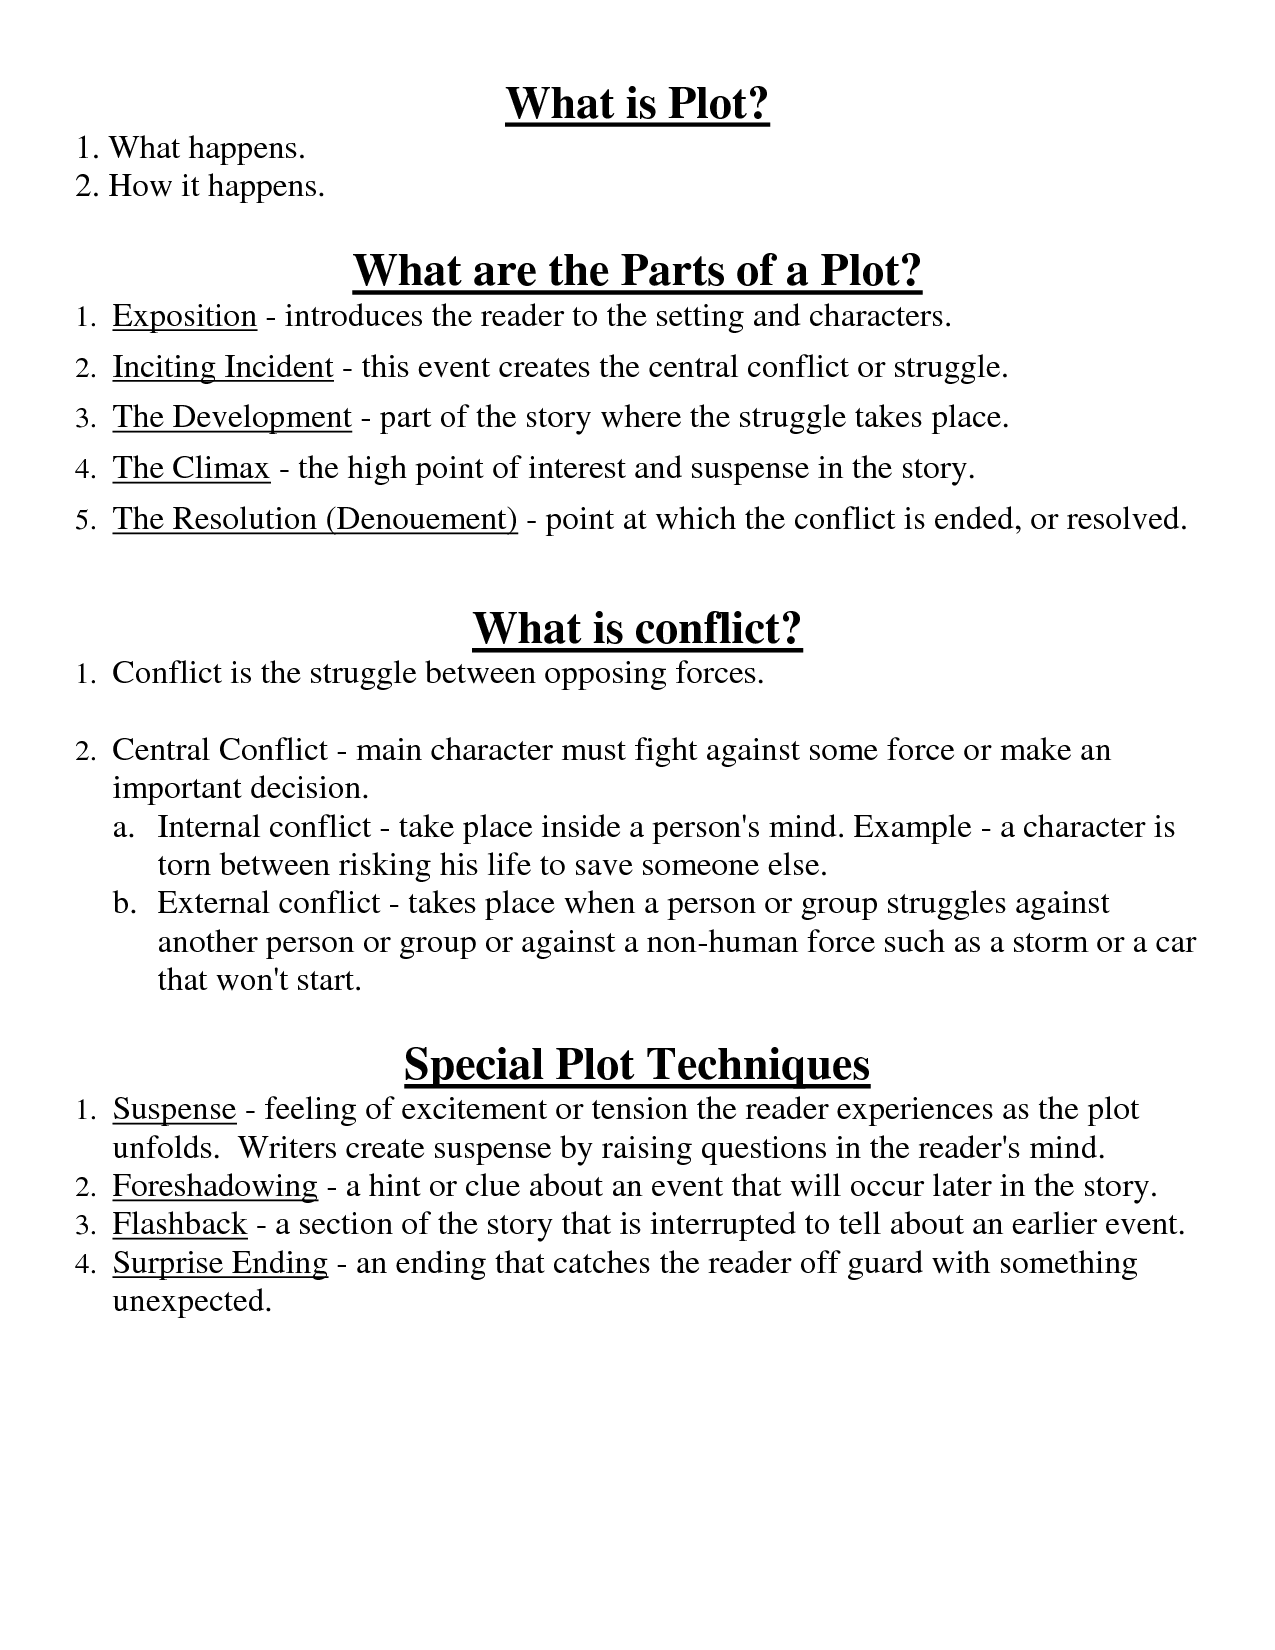 14 Best Images Of Story Setting Worksheets